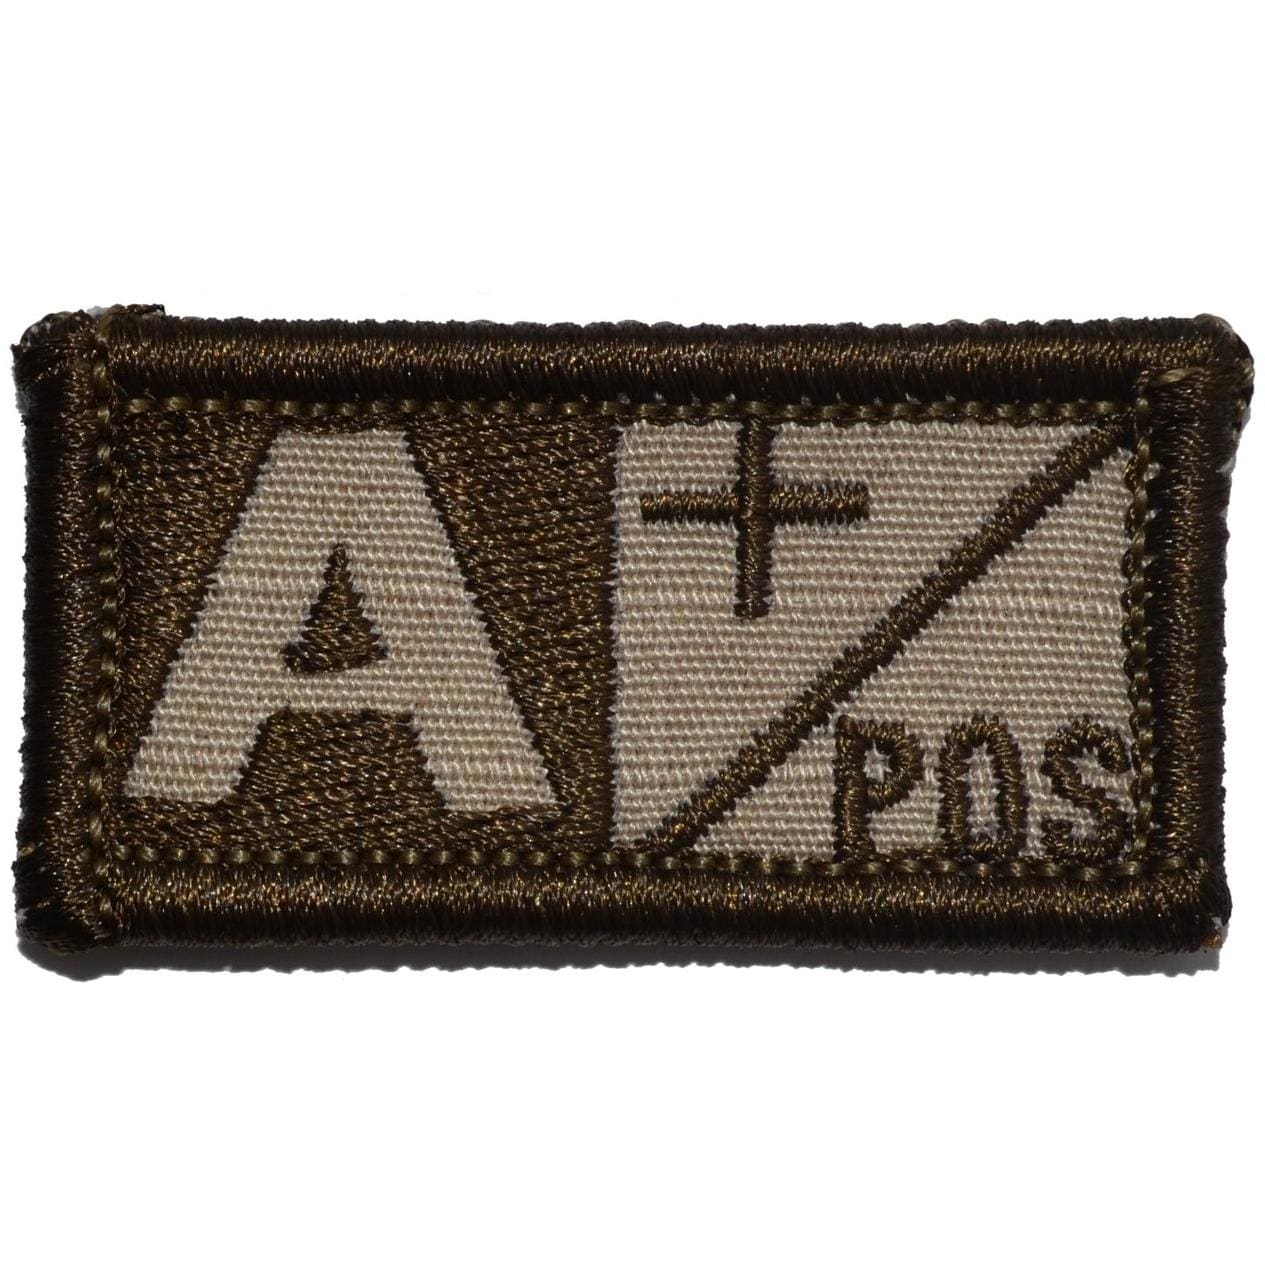 Tactical Gear Junkie Patches Blood Type - 1x2 Patch